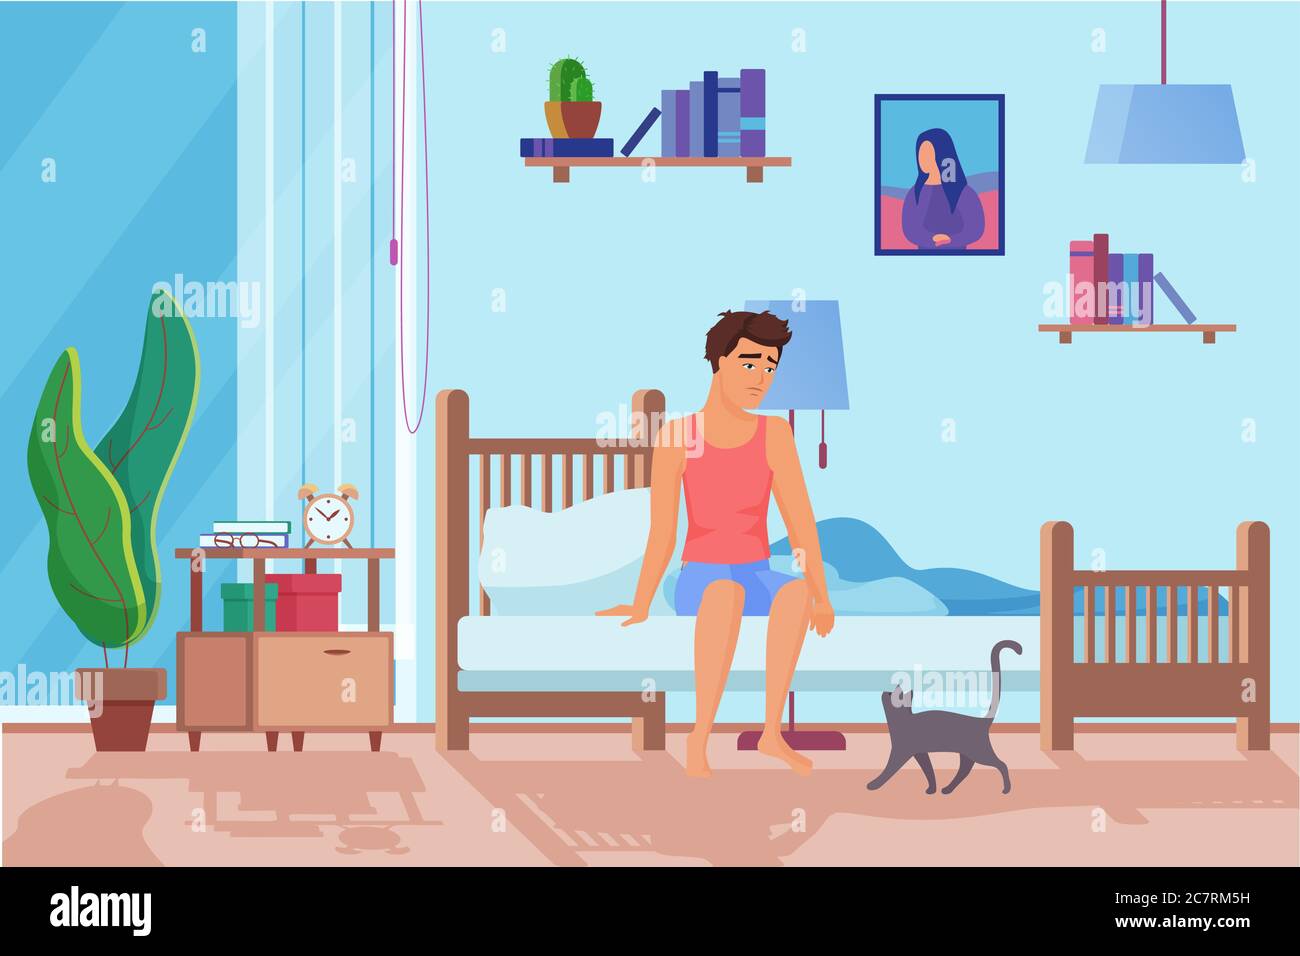 Exhausted man in morning flat vector illustration. Tired man waking up, sitting on bed. Sad, depressed male cartoon character. Unhappy guy, black cat in room. Bedroom interior design Stock Vector